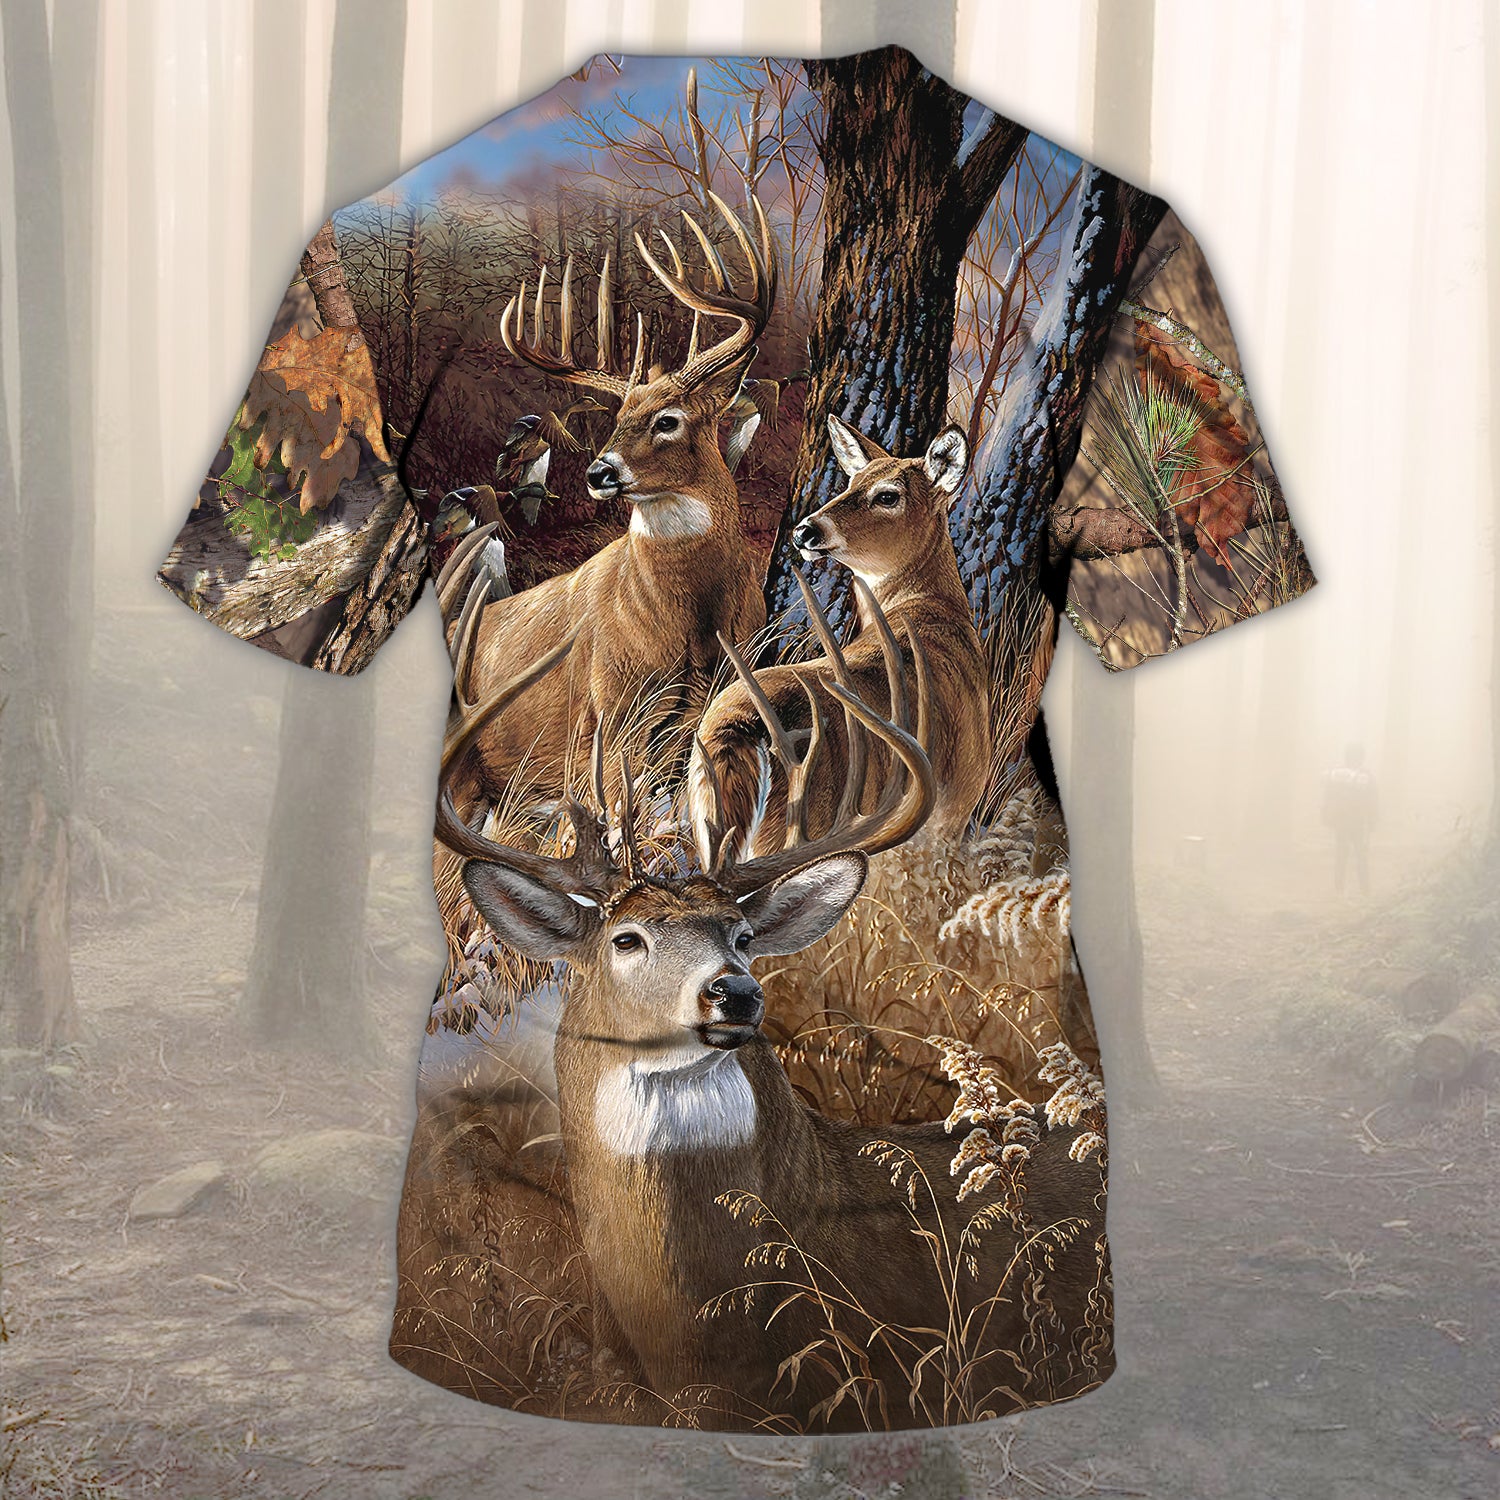 HUNTING 8668 - Personalized Name 3D T Shirt - NBTT